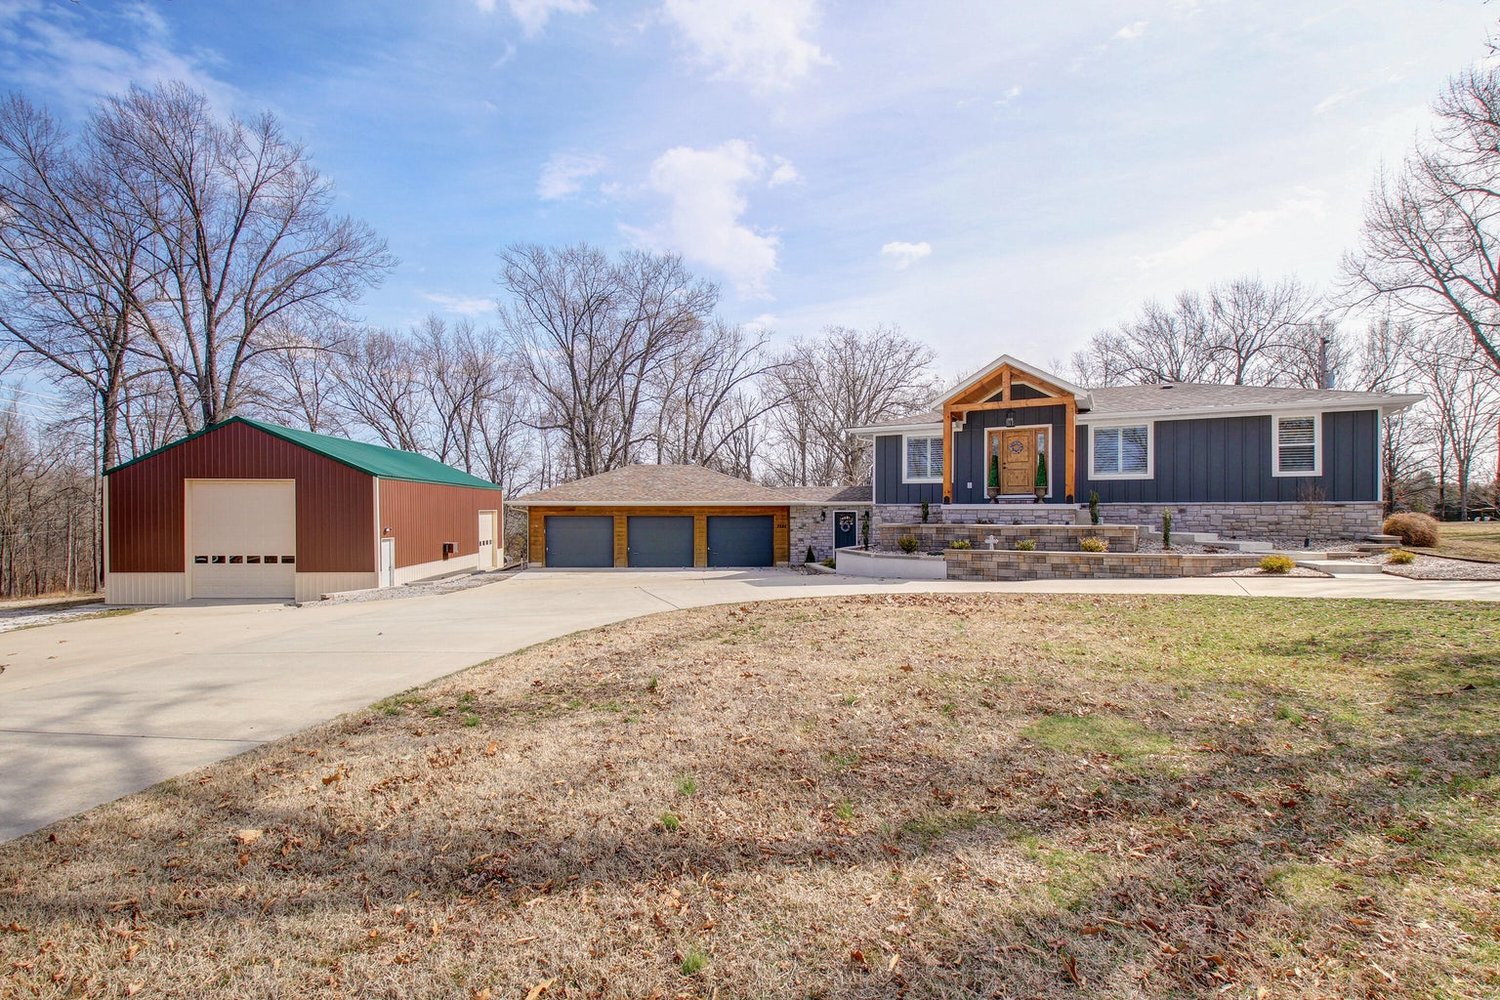 3282 S. Farm Road 199
$879,500
Bedrooms: 4
Bathrooms: 3
Listing firm: Southwest Missouri Realty